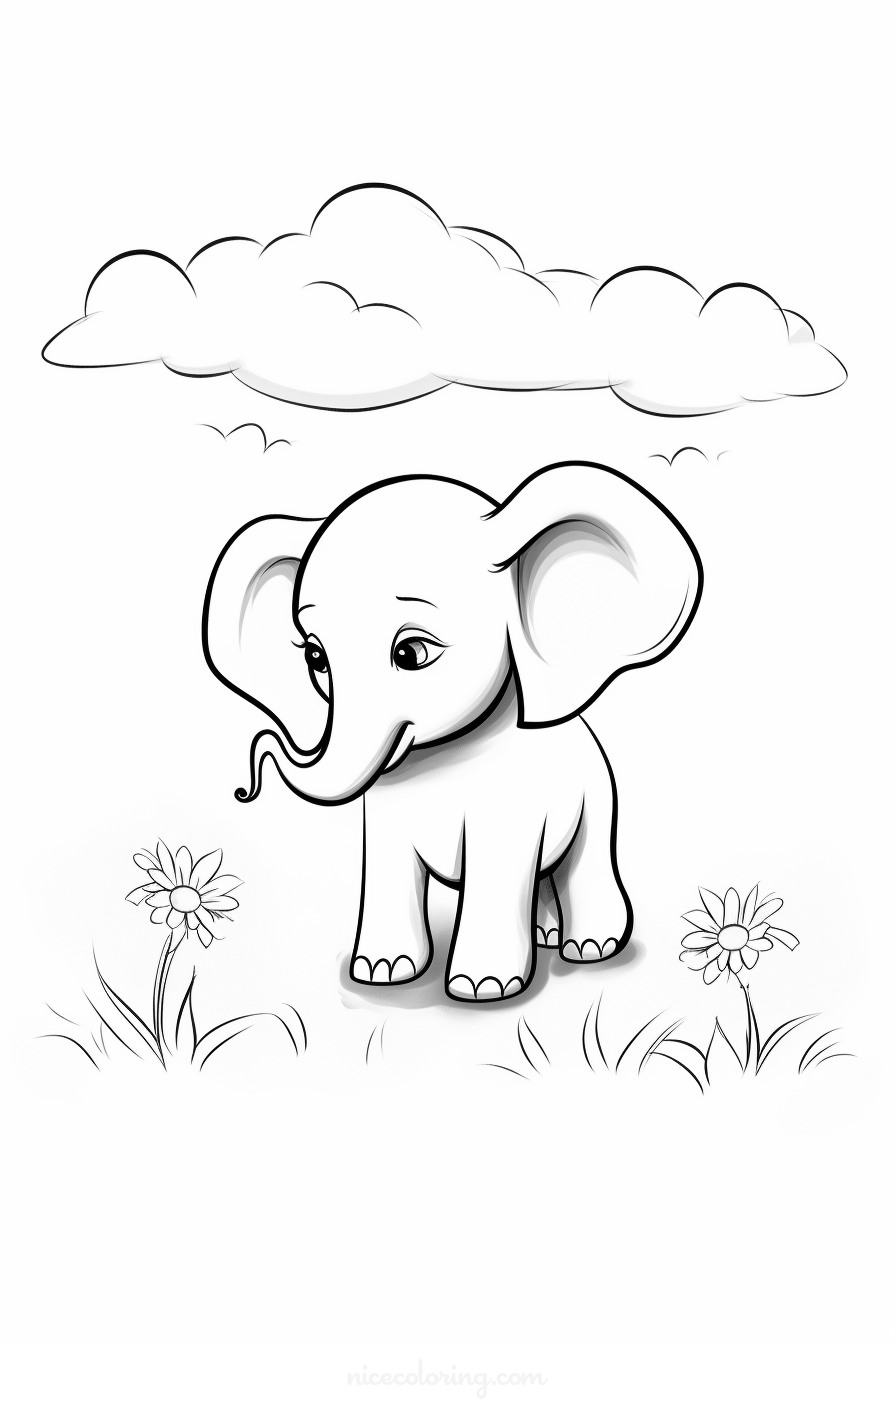 Elephant in a peaceful forest coloring page